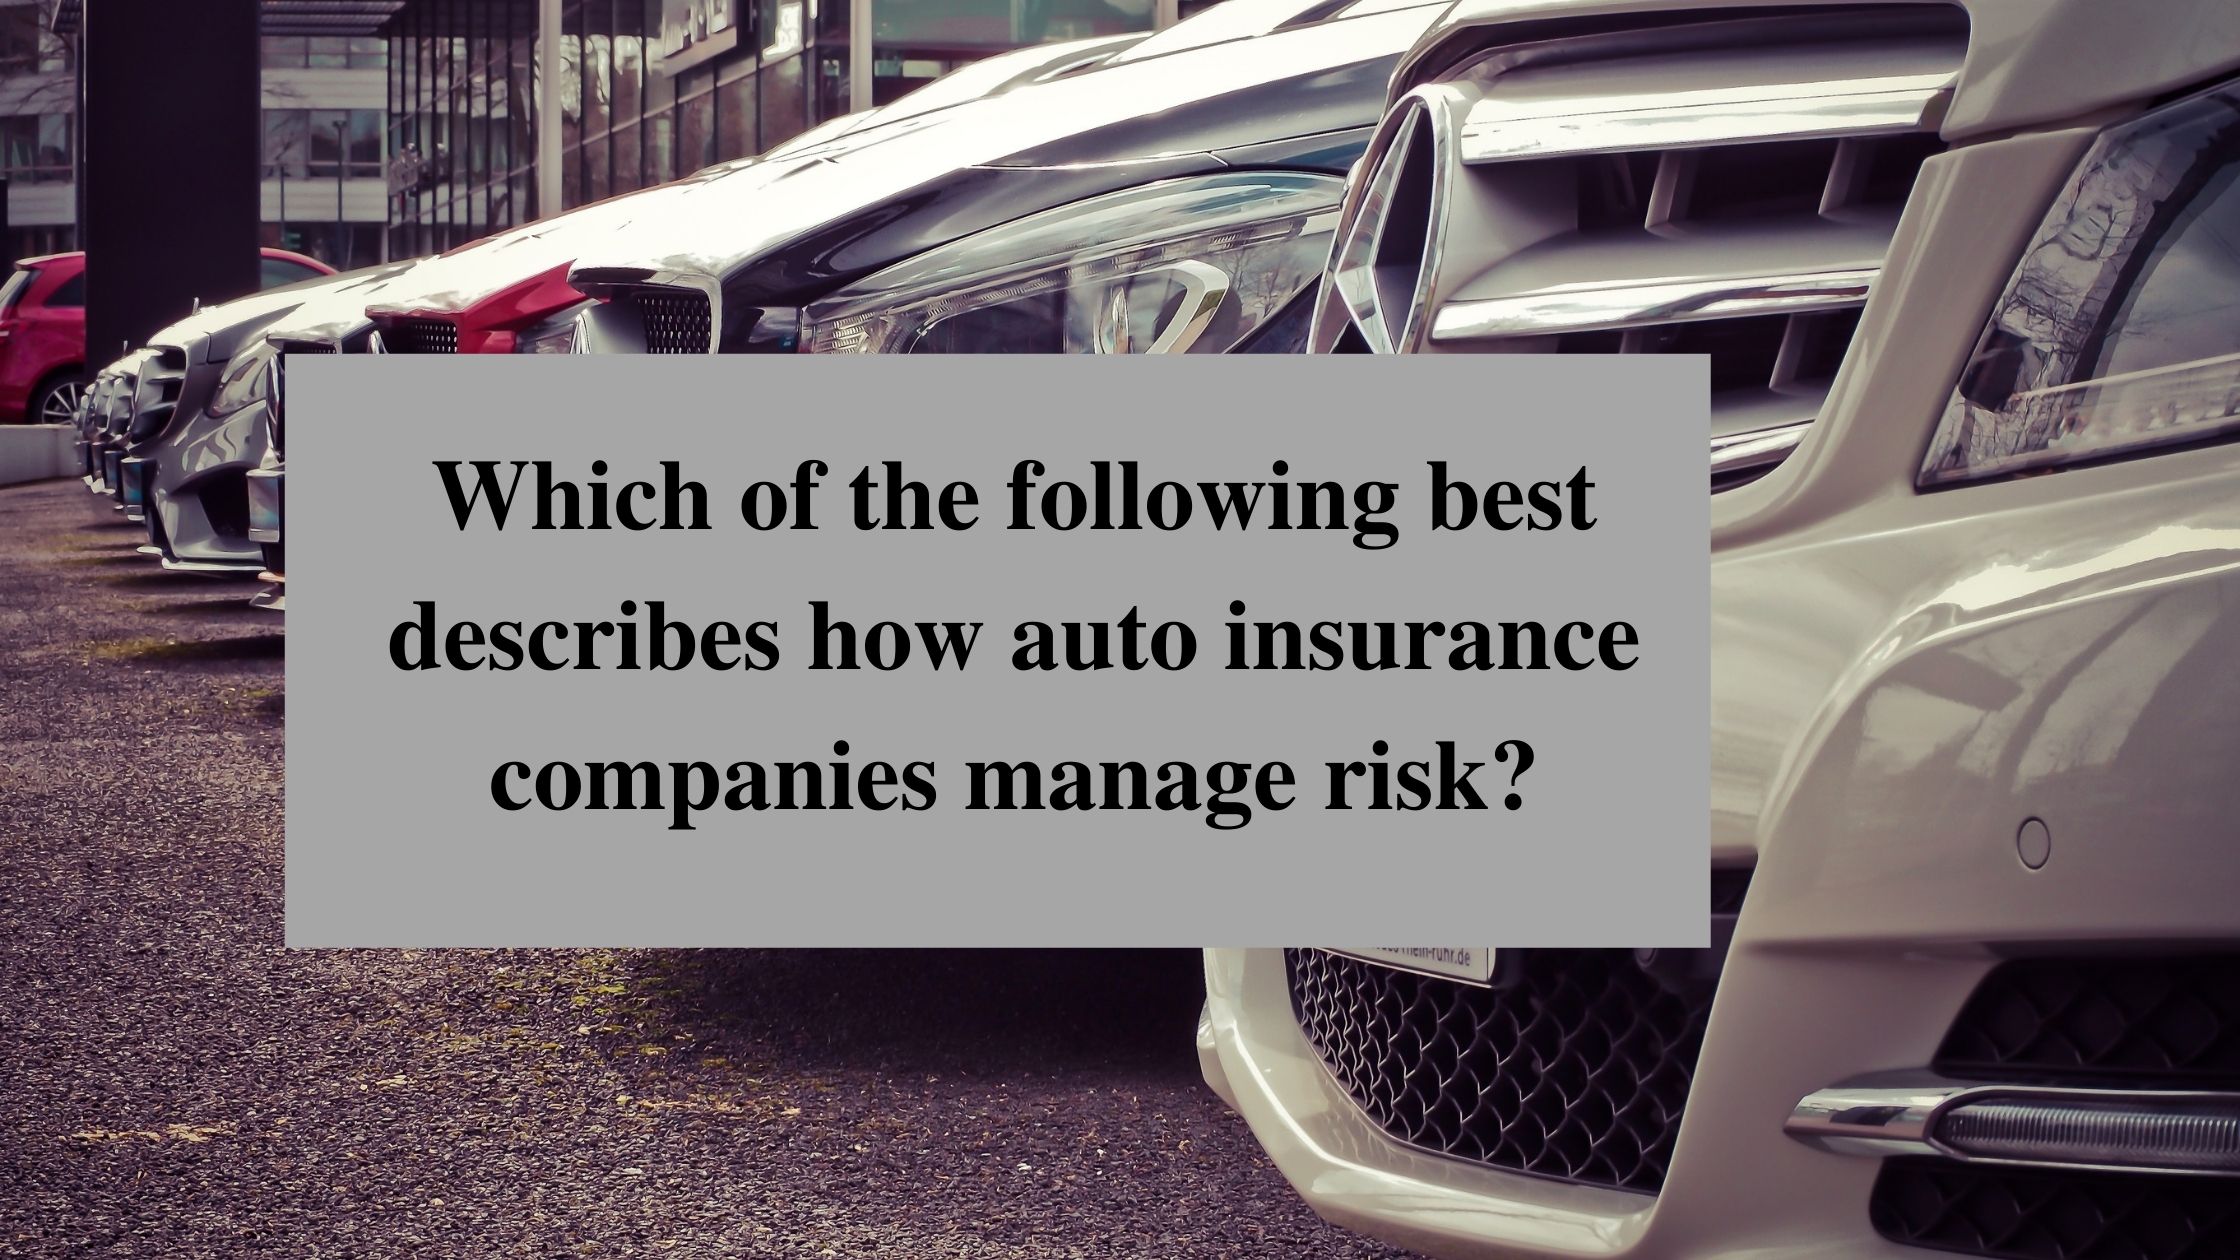 Which of the following best describes how auto insurance companies manage risk?